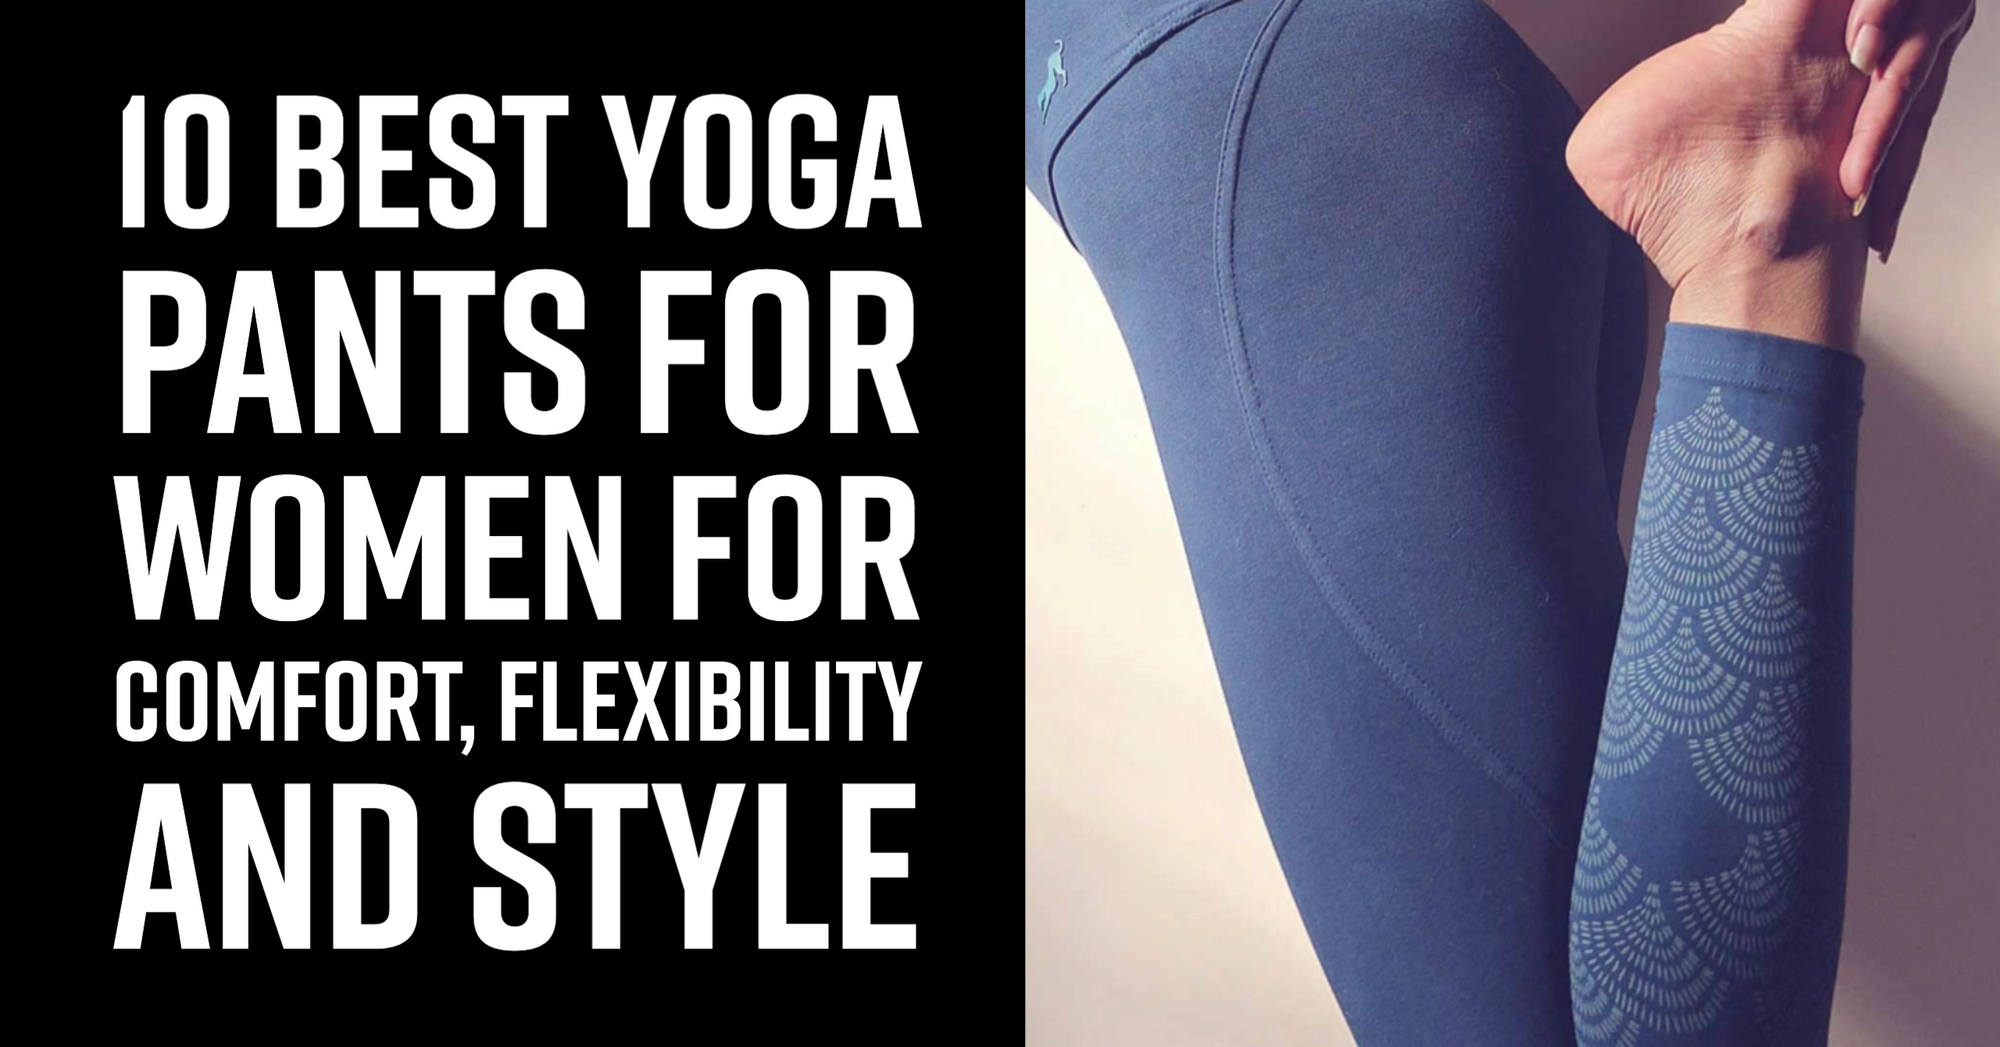 10 Best Yoga Pants for Women for Comfort, Flexibility and Style - Proyog